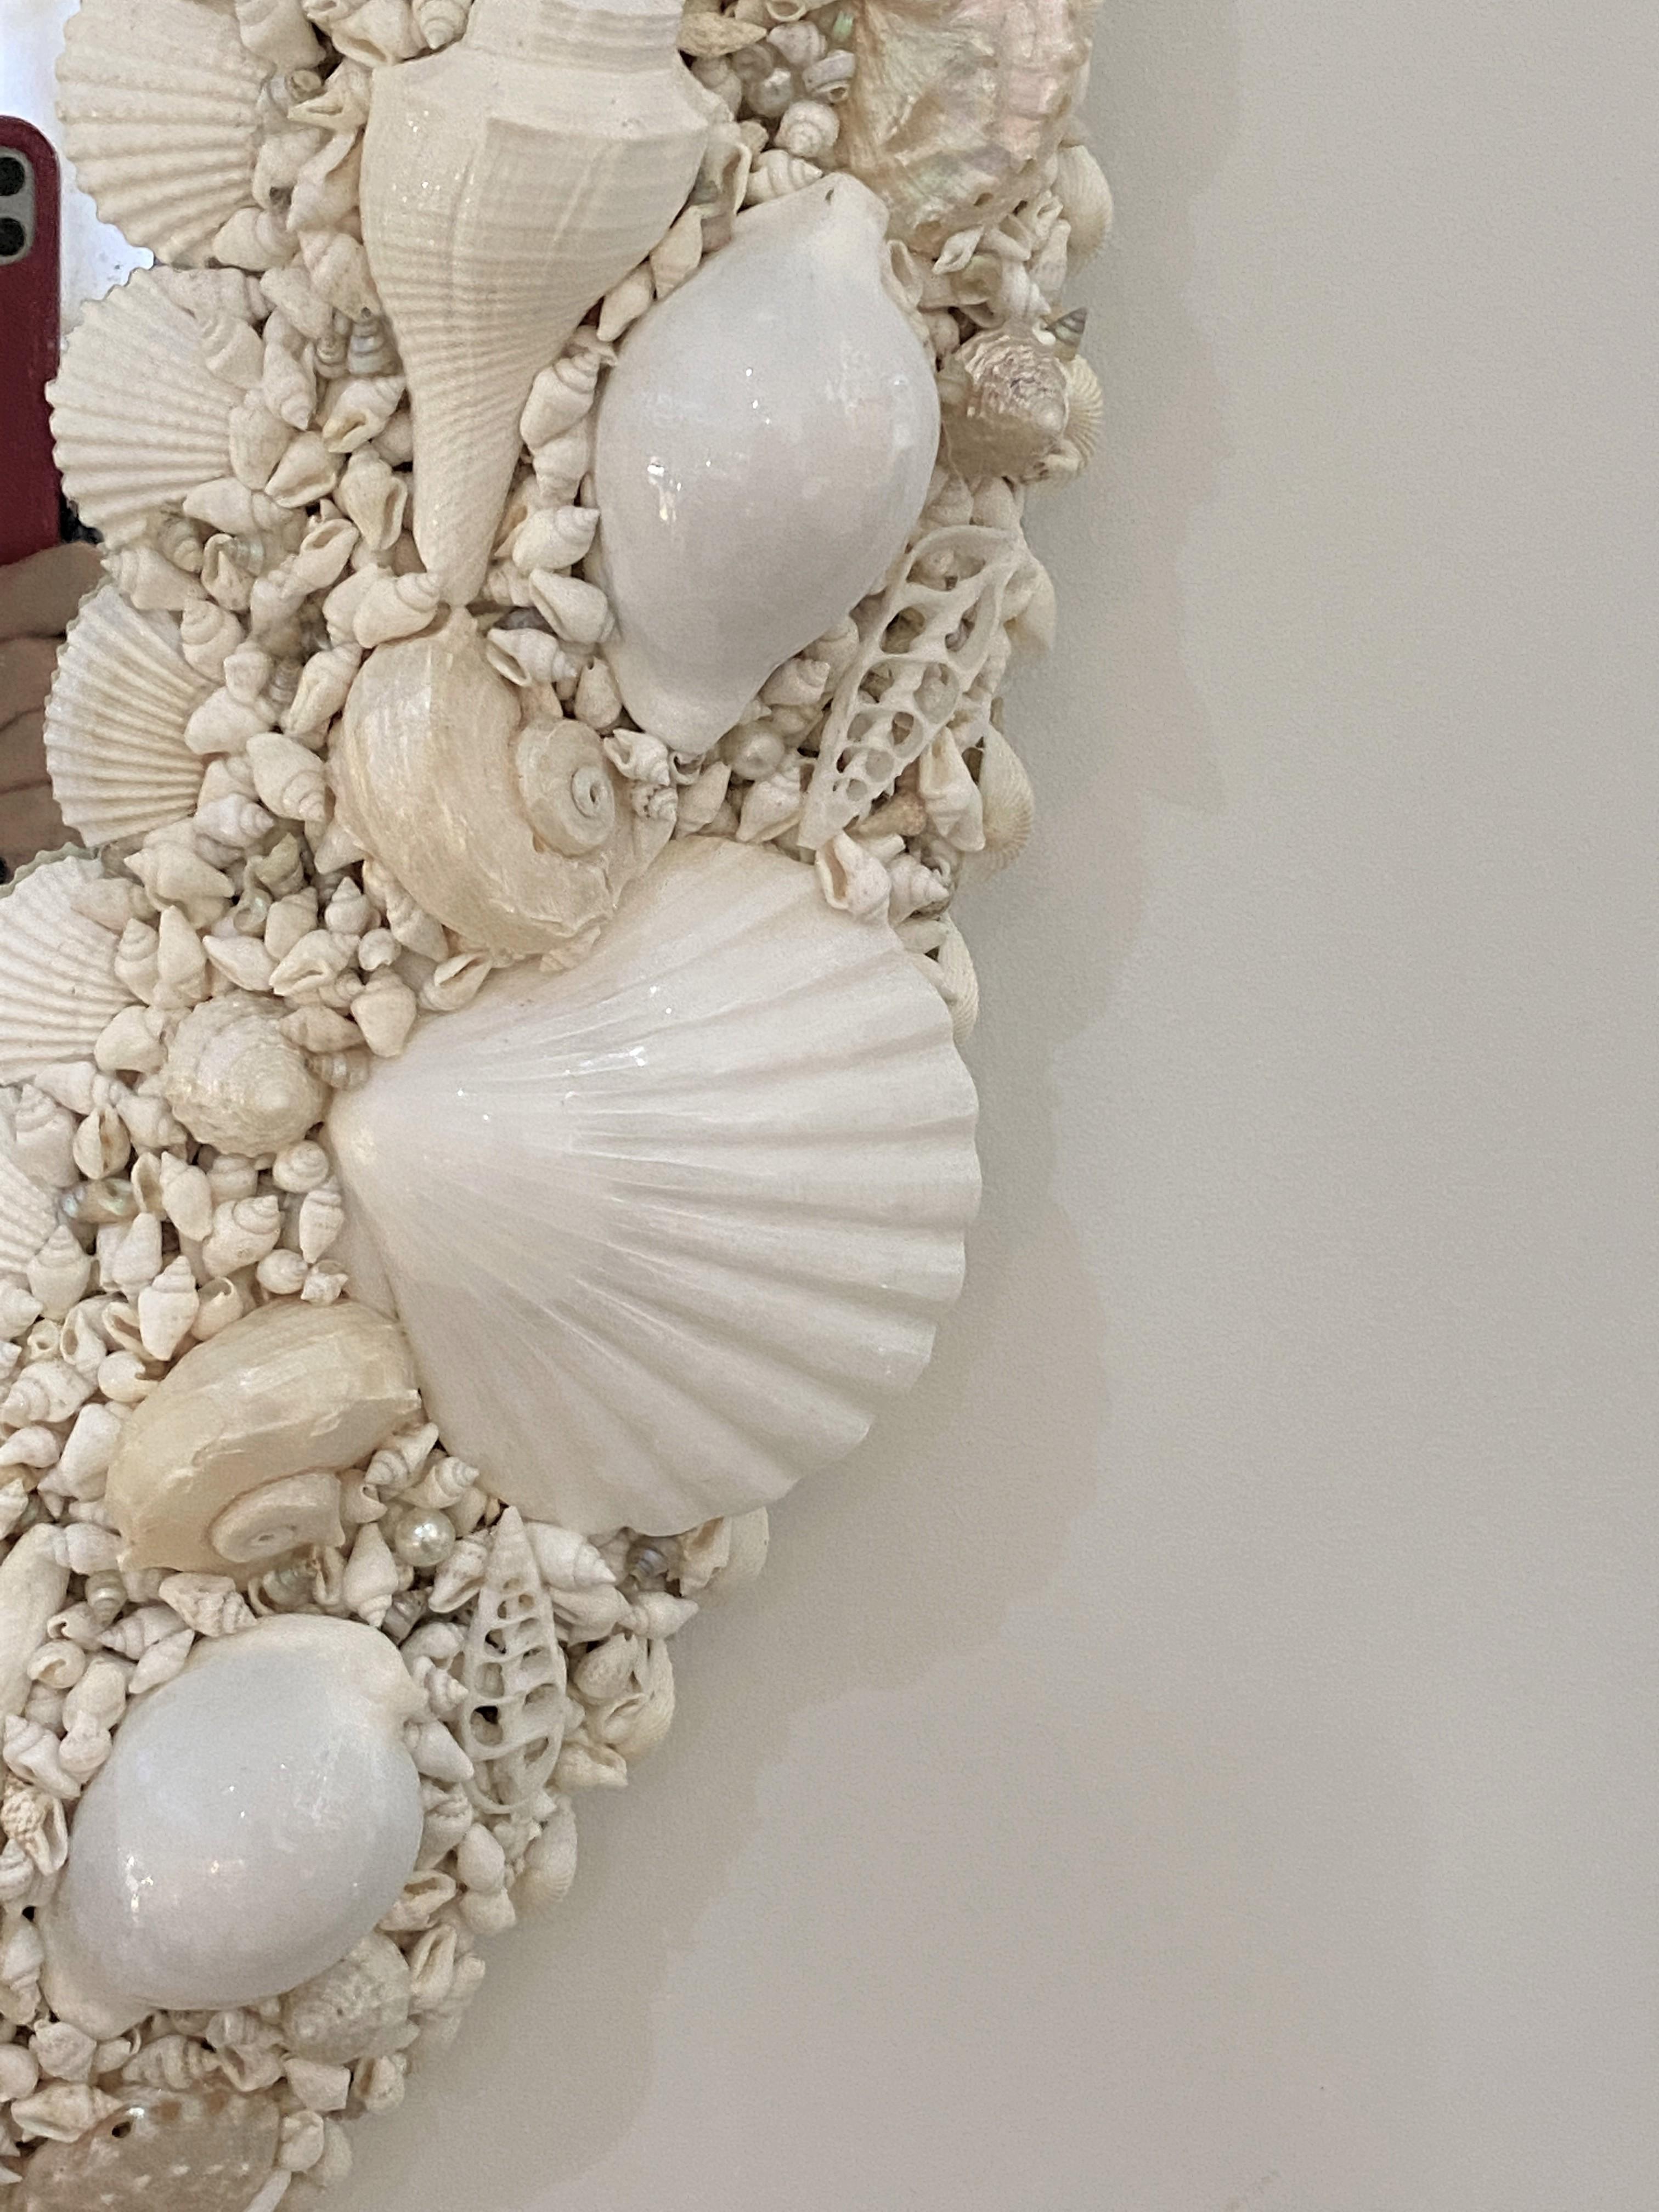 American White Seashell Encrusted Mirror by Iconic Snob Galeries